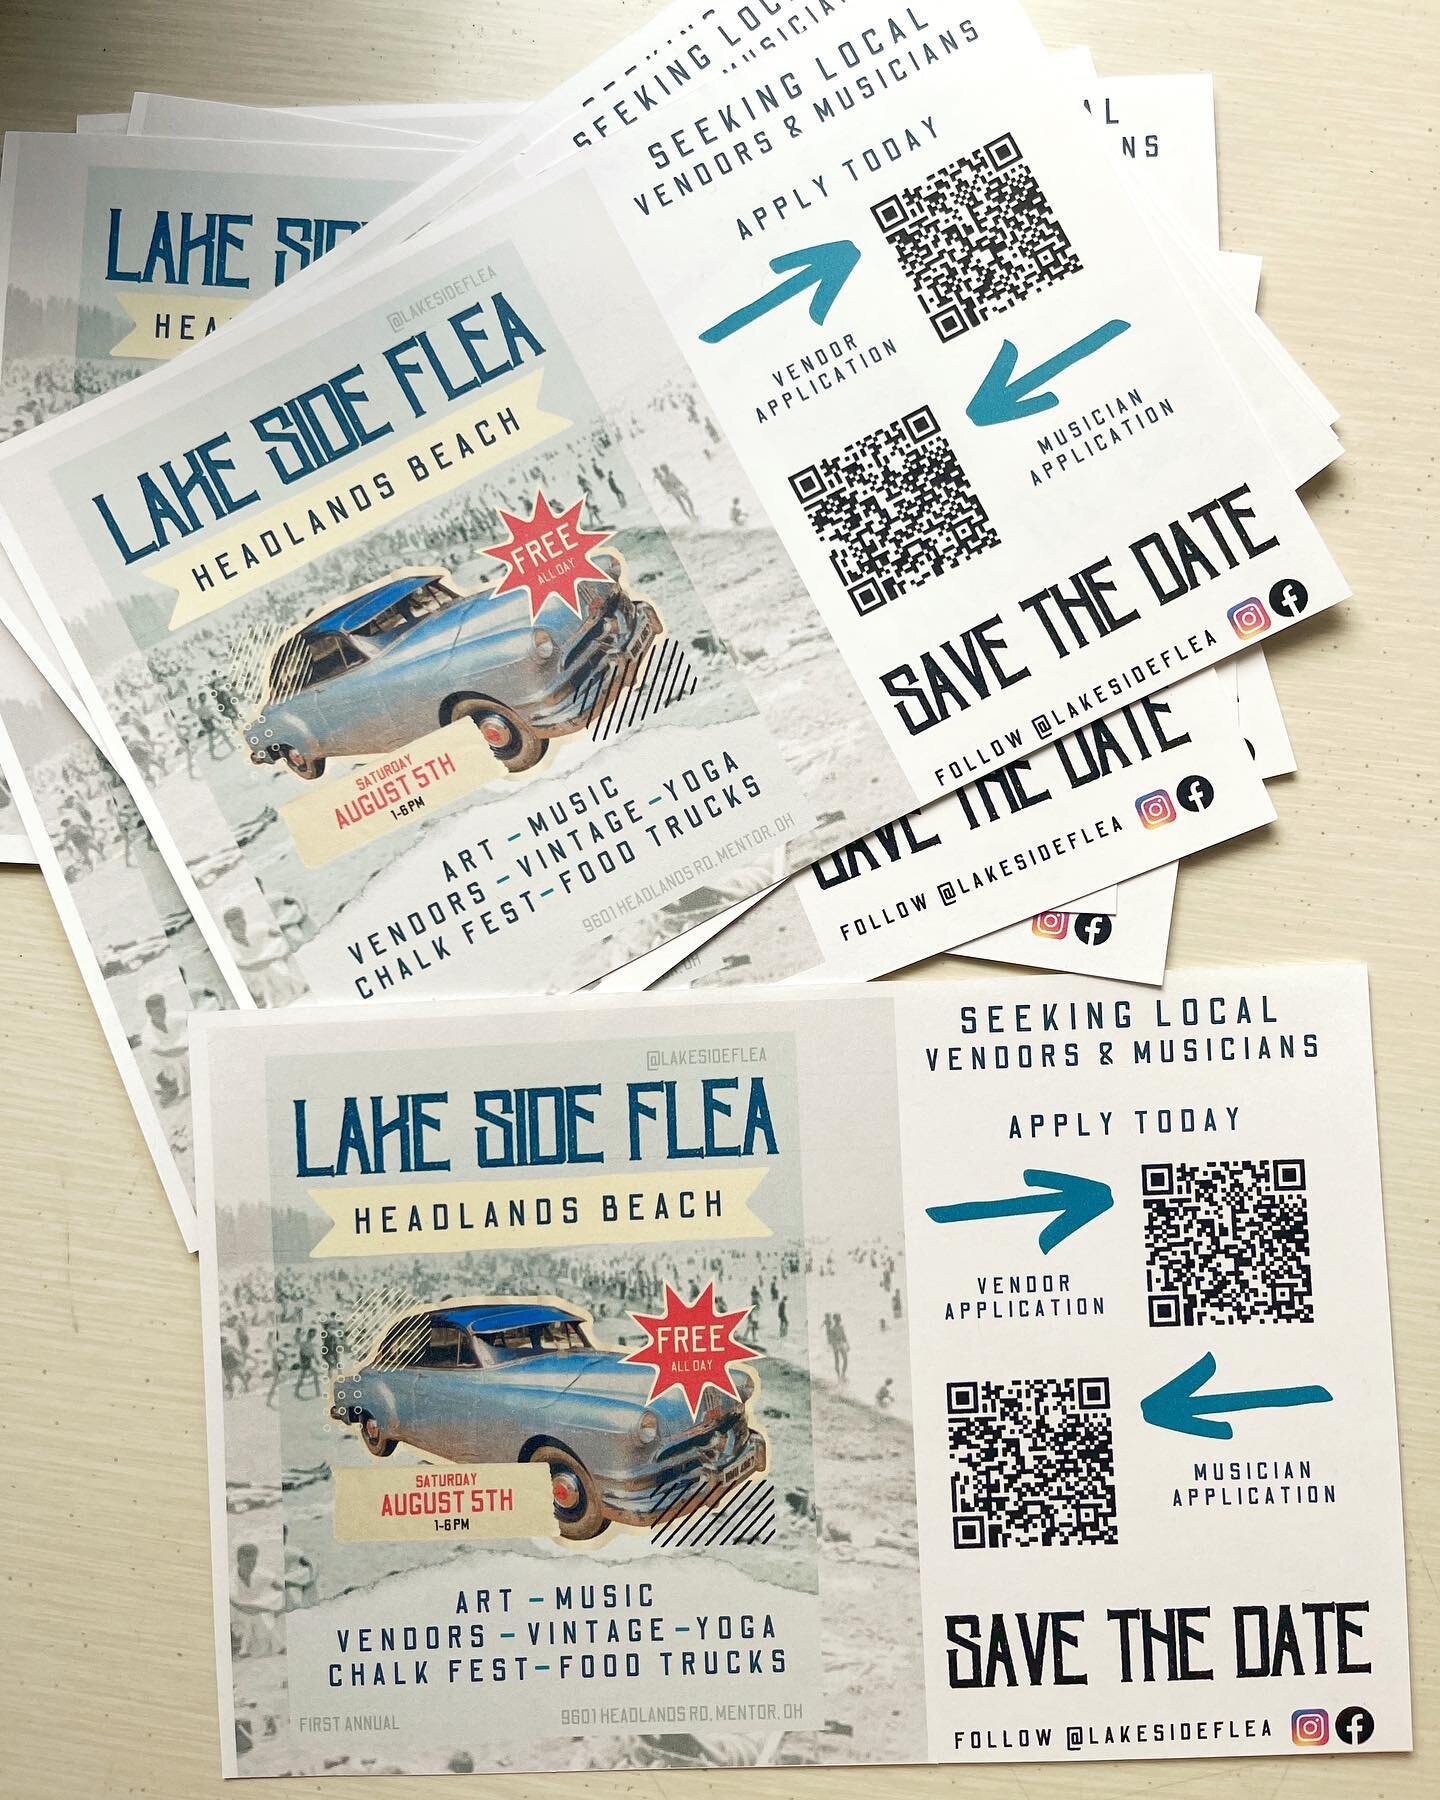 I am going around town today posting these handmade flyers to encourage local folks to &quot;save the date&quot; &amp; apply to be a vendor / local musician!

#lakesideflea #artsevent #opencall #vendorshow #livemusic #headlandsbeach